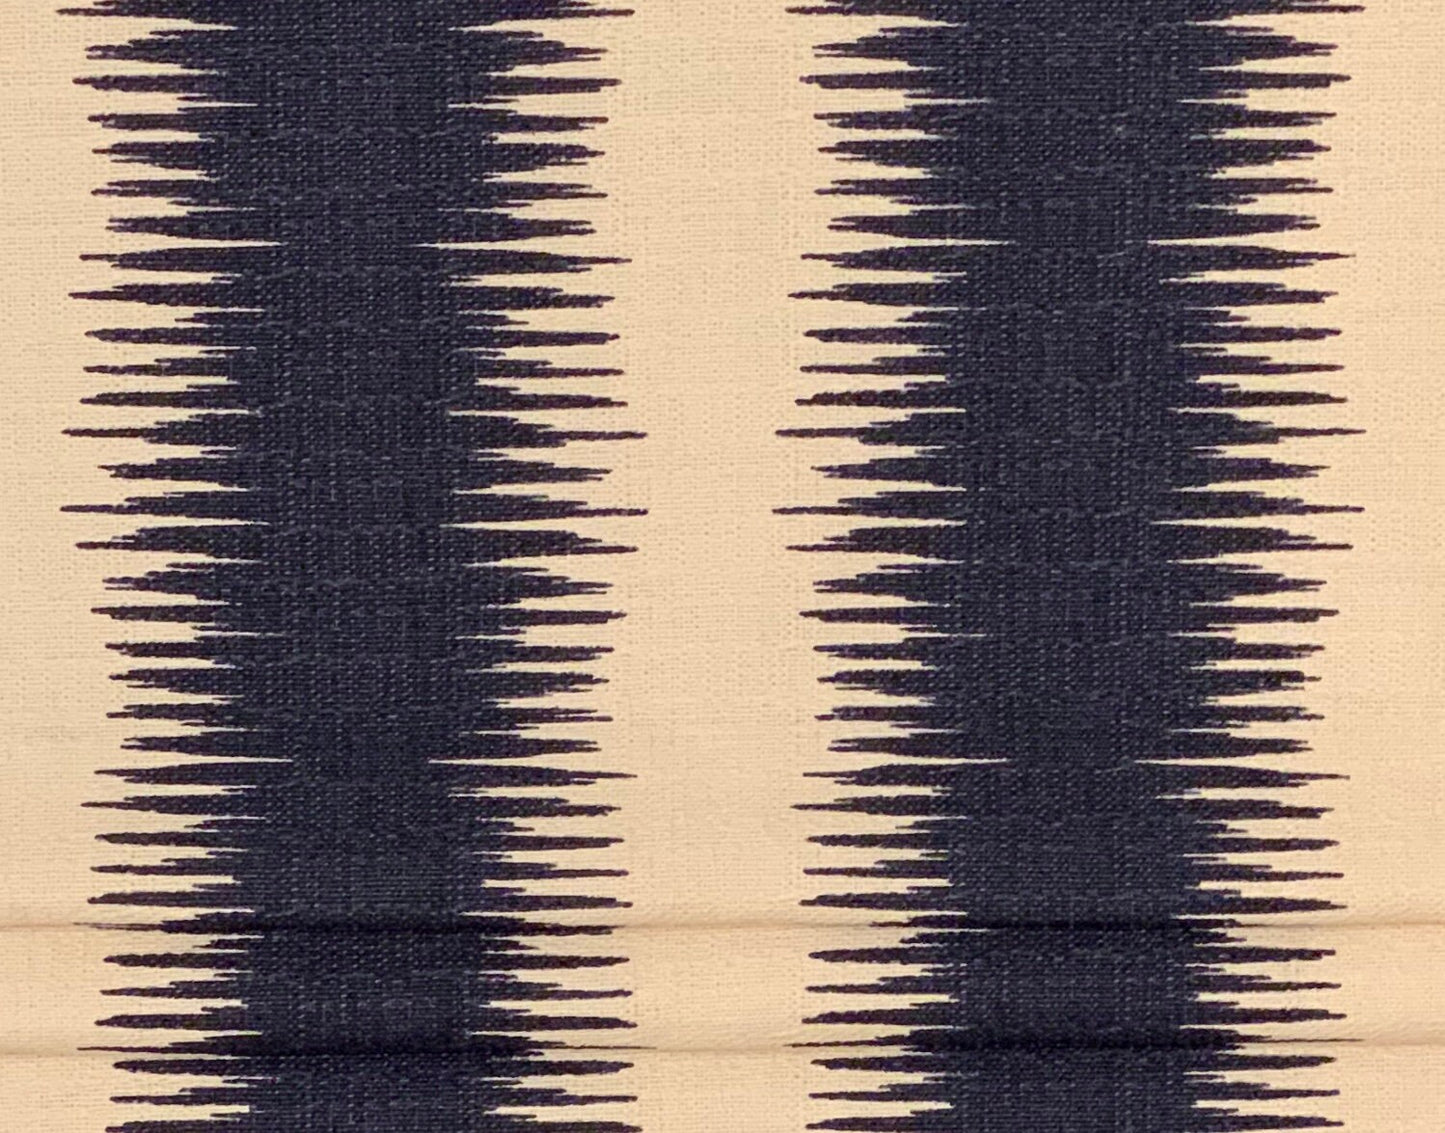 Faux Roman Shade Valance in Navy Blue Ikat Stripe on Birch/Ivory Textured Cotton (similar to bark cloth), Fully Lined, Custom Made Valance